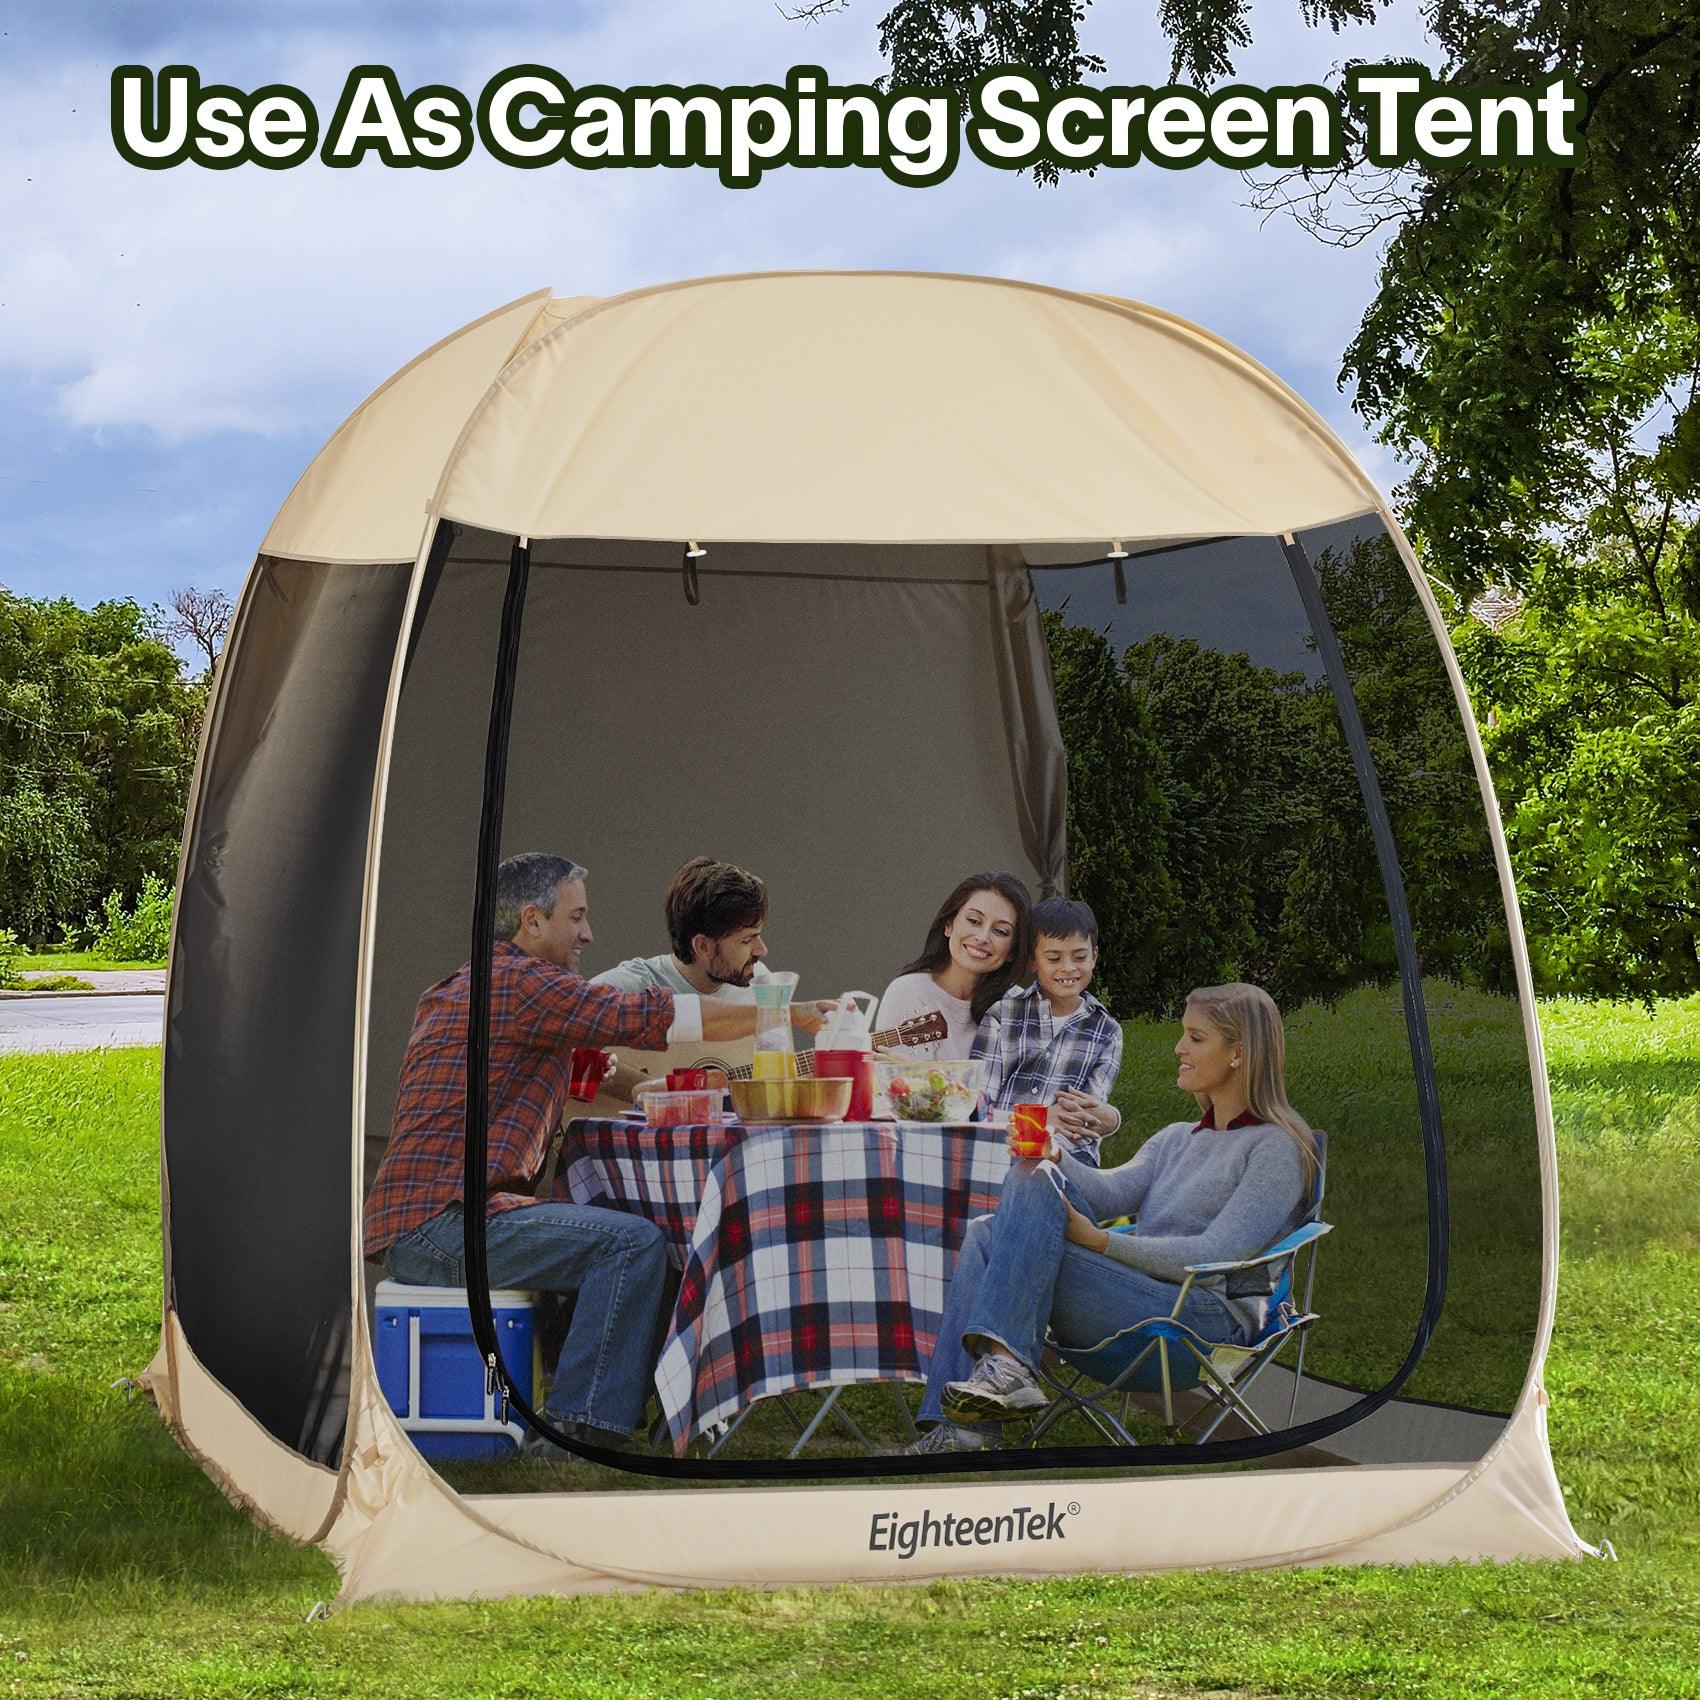 Use As Camping Screen Tent